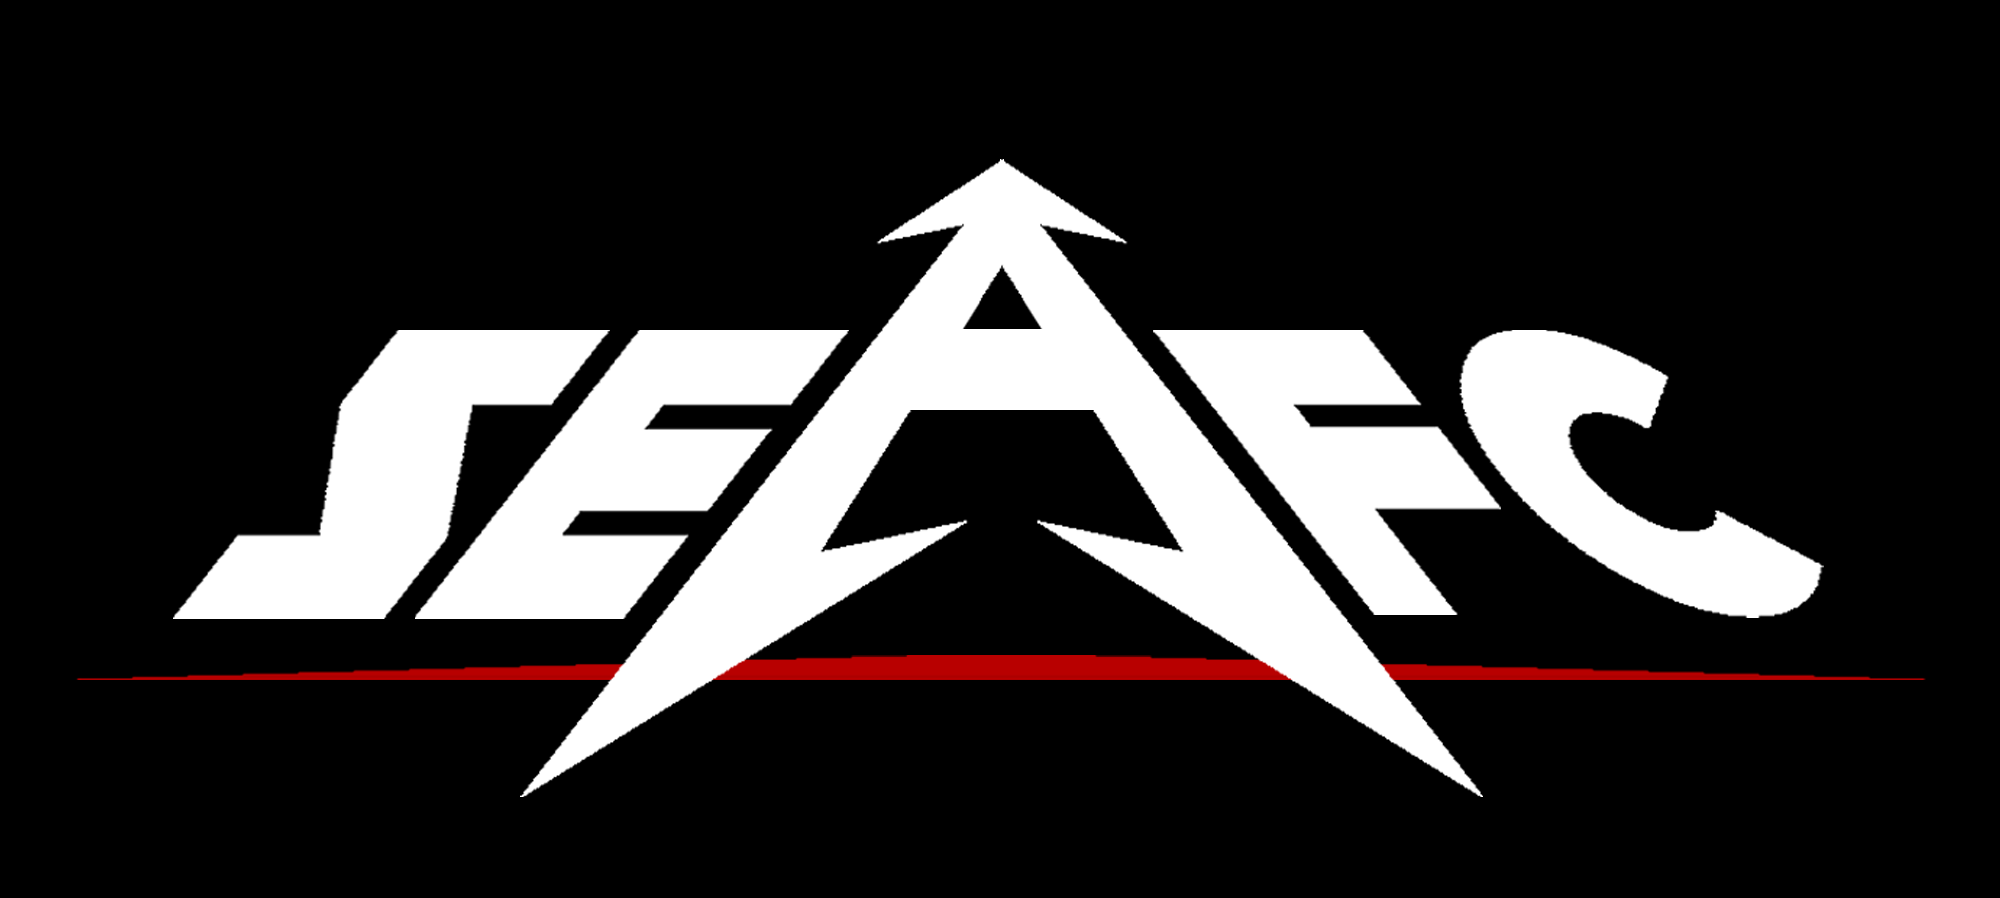 SEAFC South East Asia Fighting Championship logo